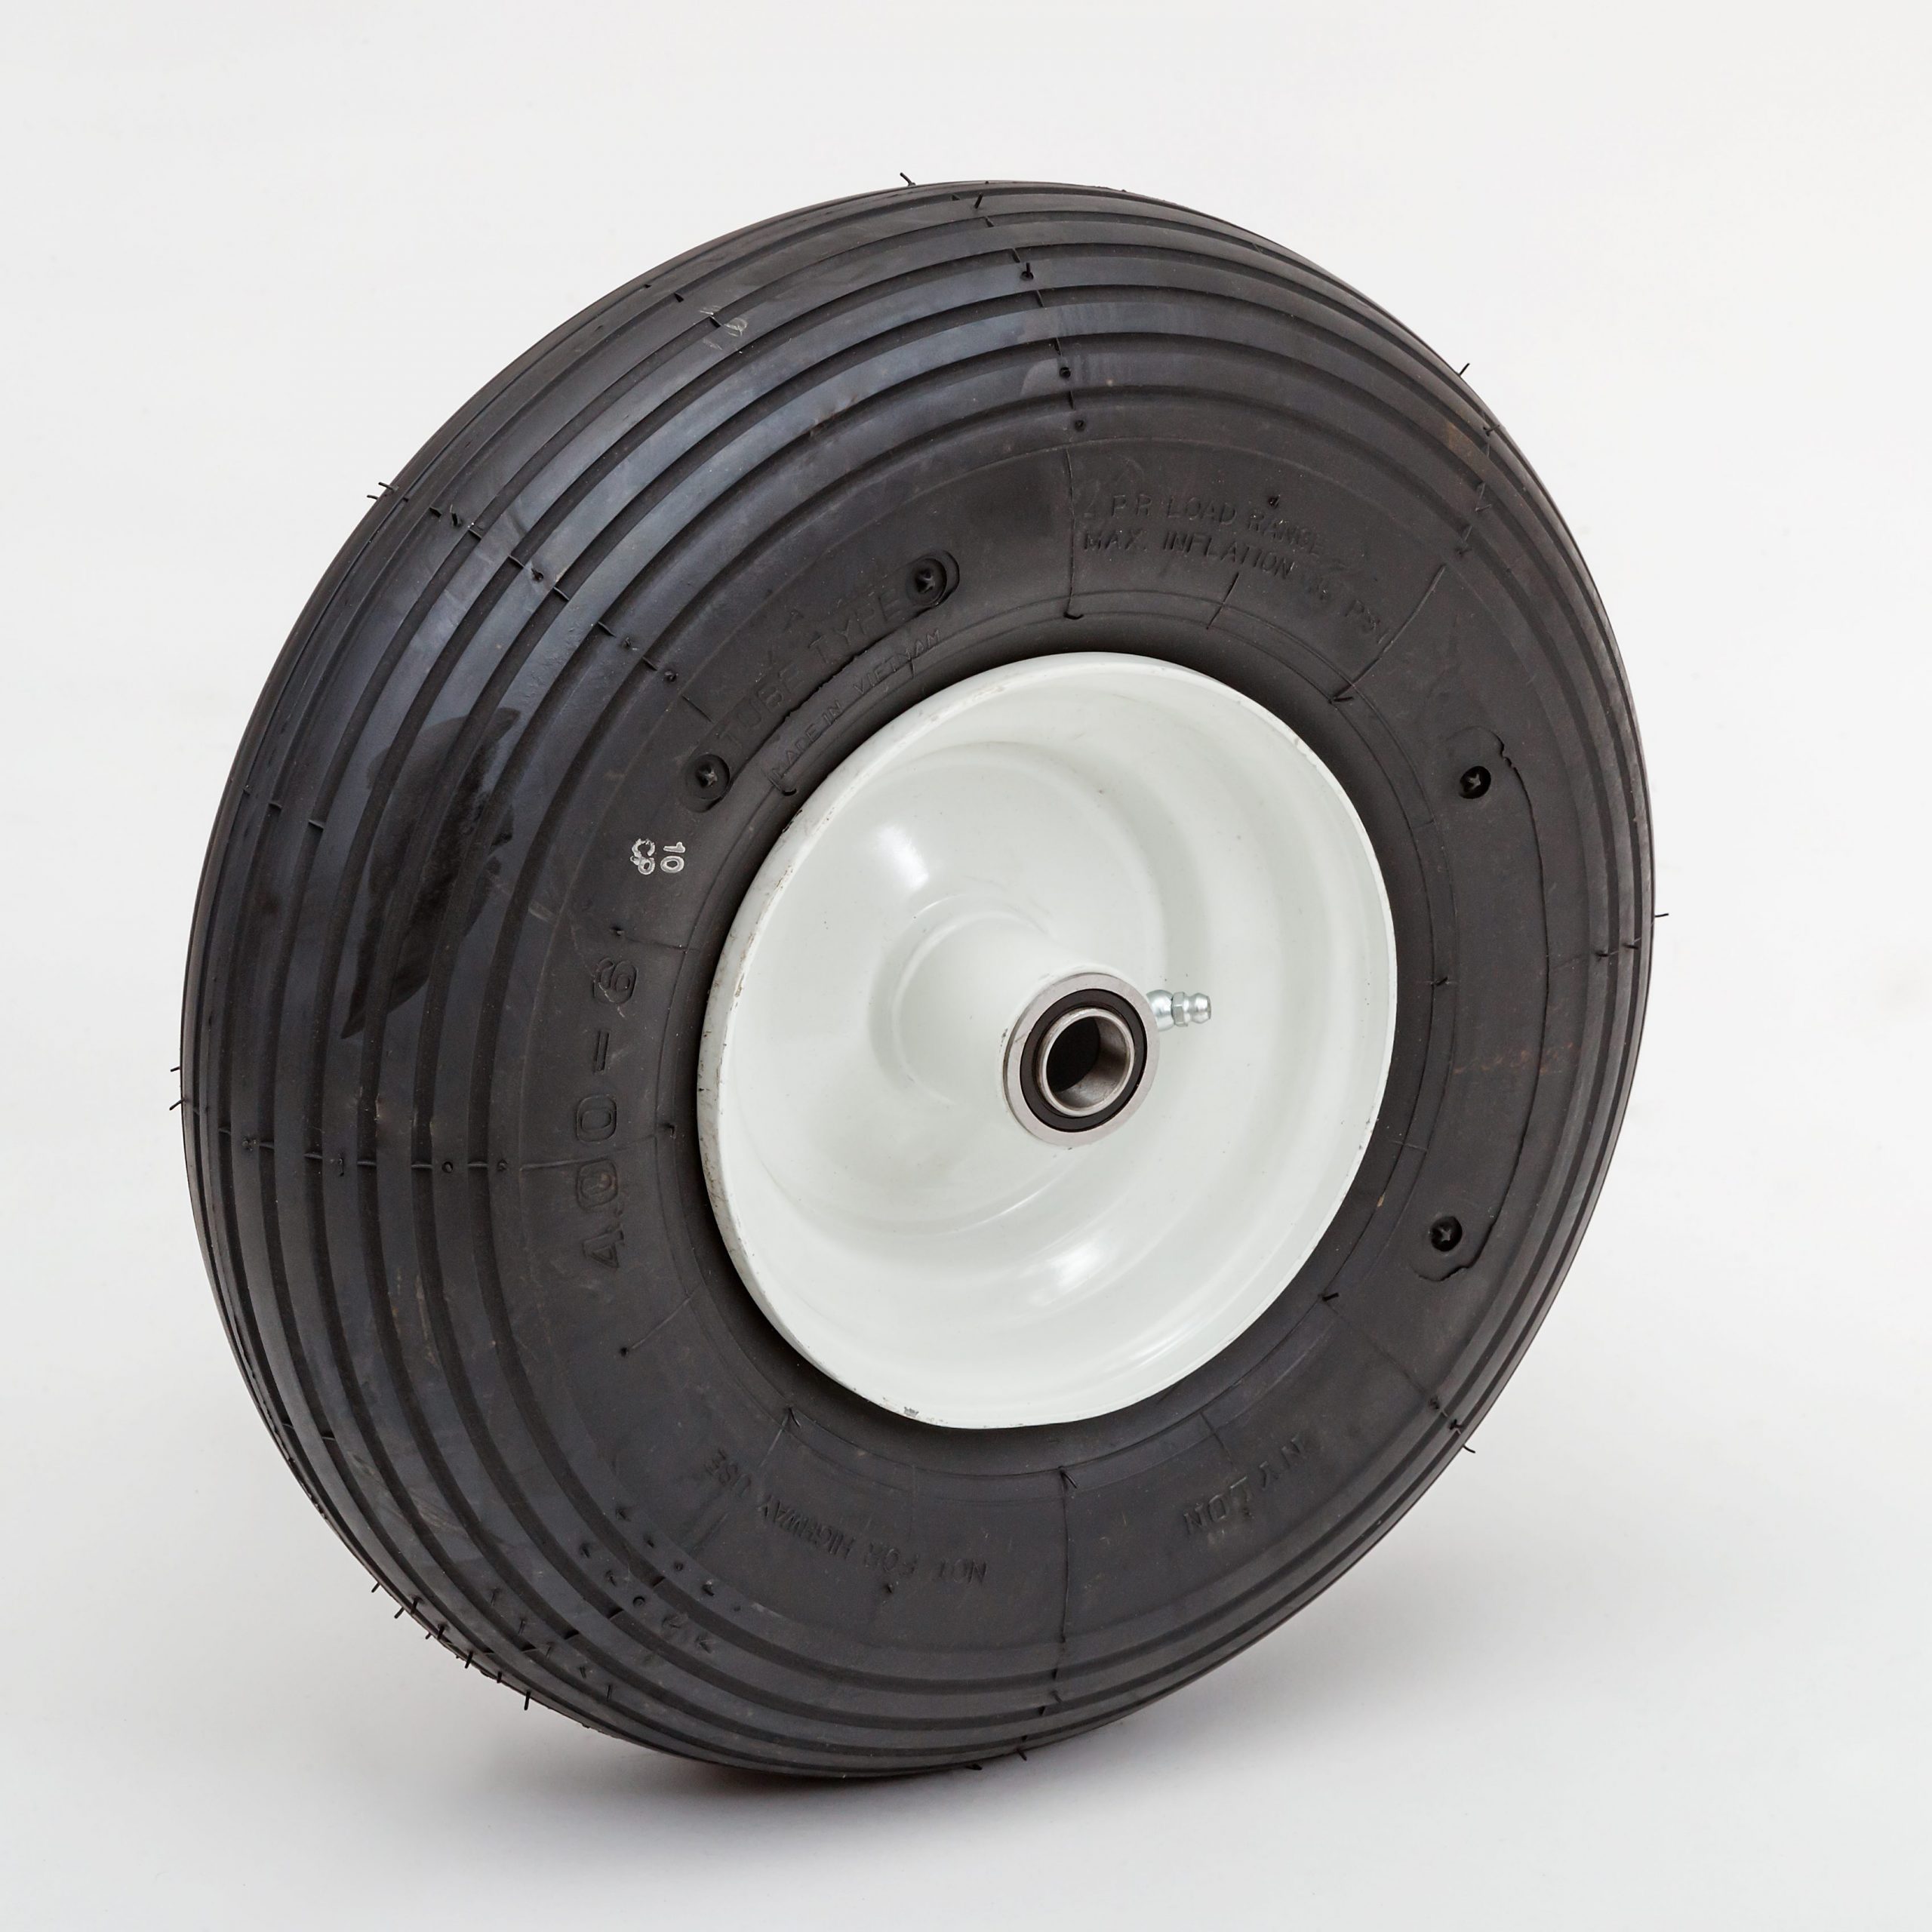 Set of 2 Hand Truck Tires Semi Pneumatic 10" x 2-3/4" Wheel with 5/8" ID 